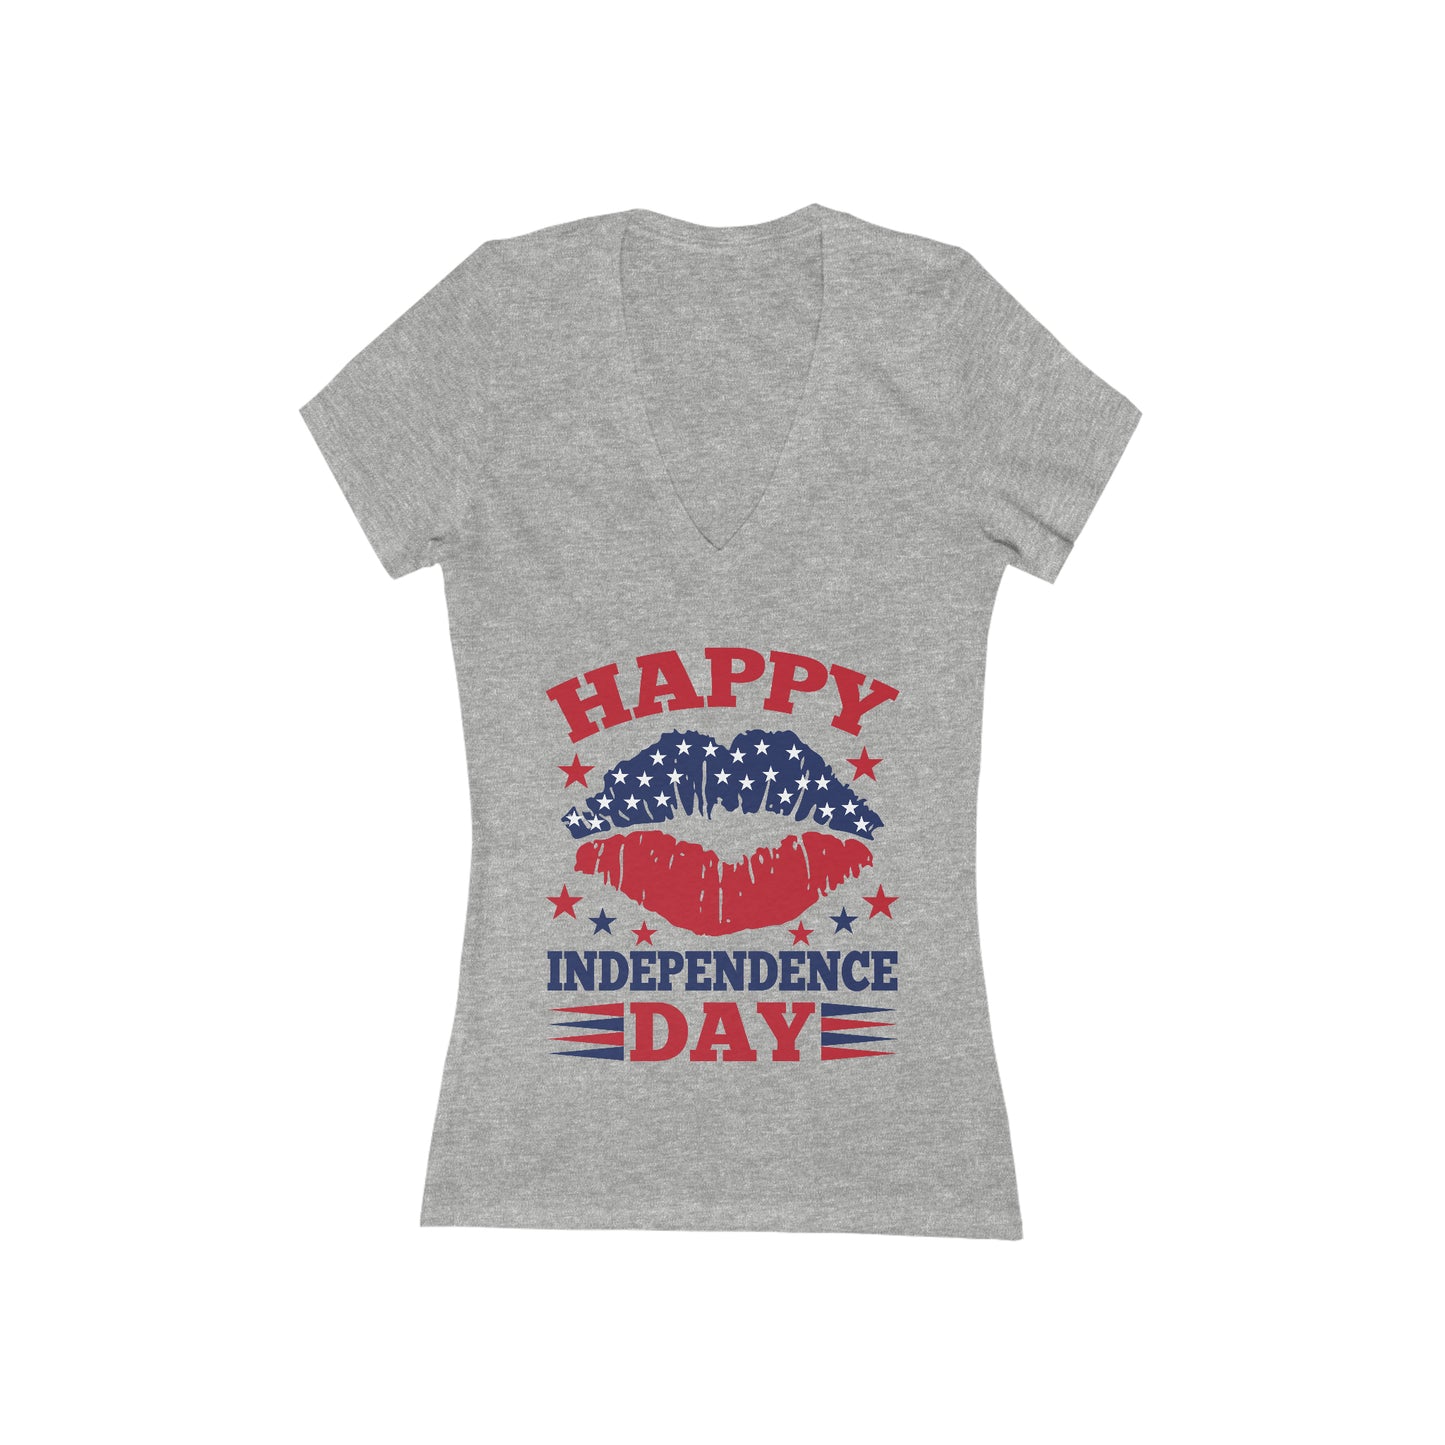 Independence Day T-Shirt For Fourth Of July TShirt For Stars And Stripes T Shirt For Patriotic Shirt For Woman